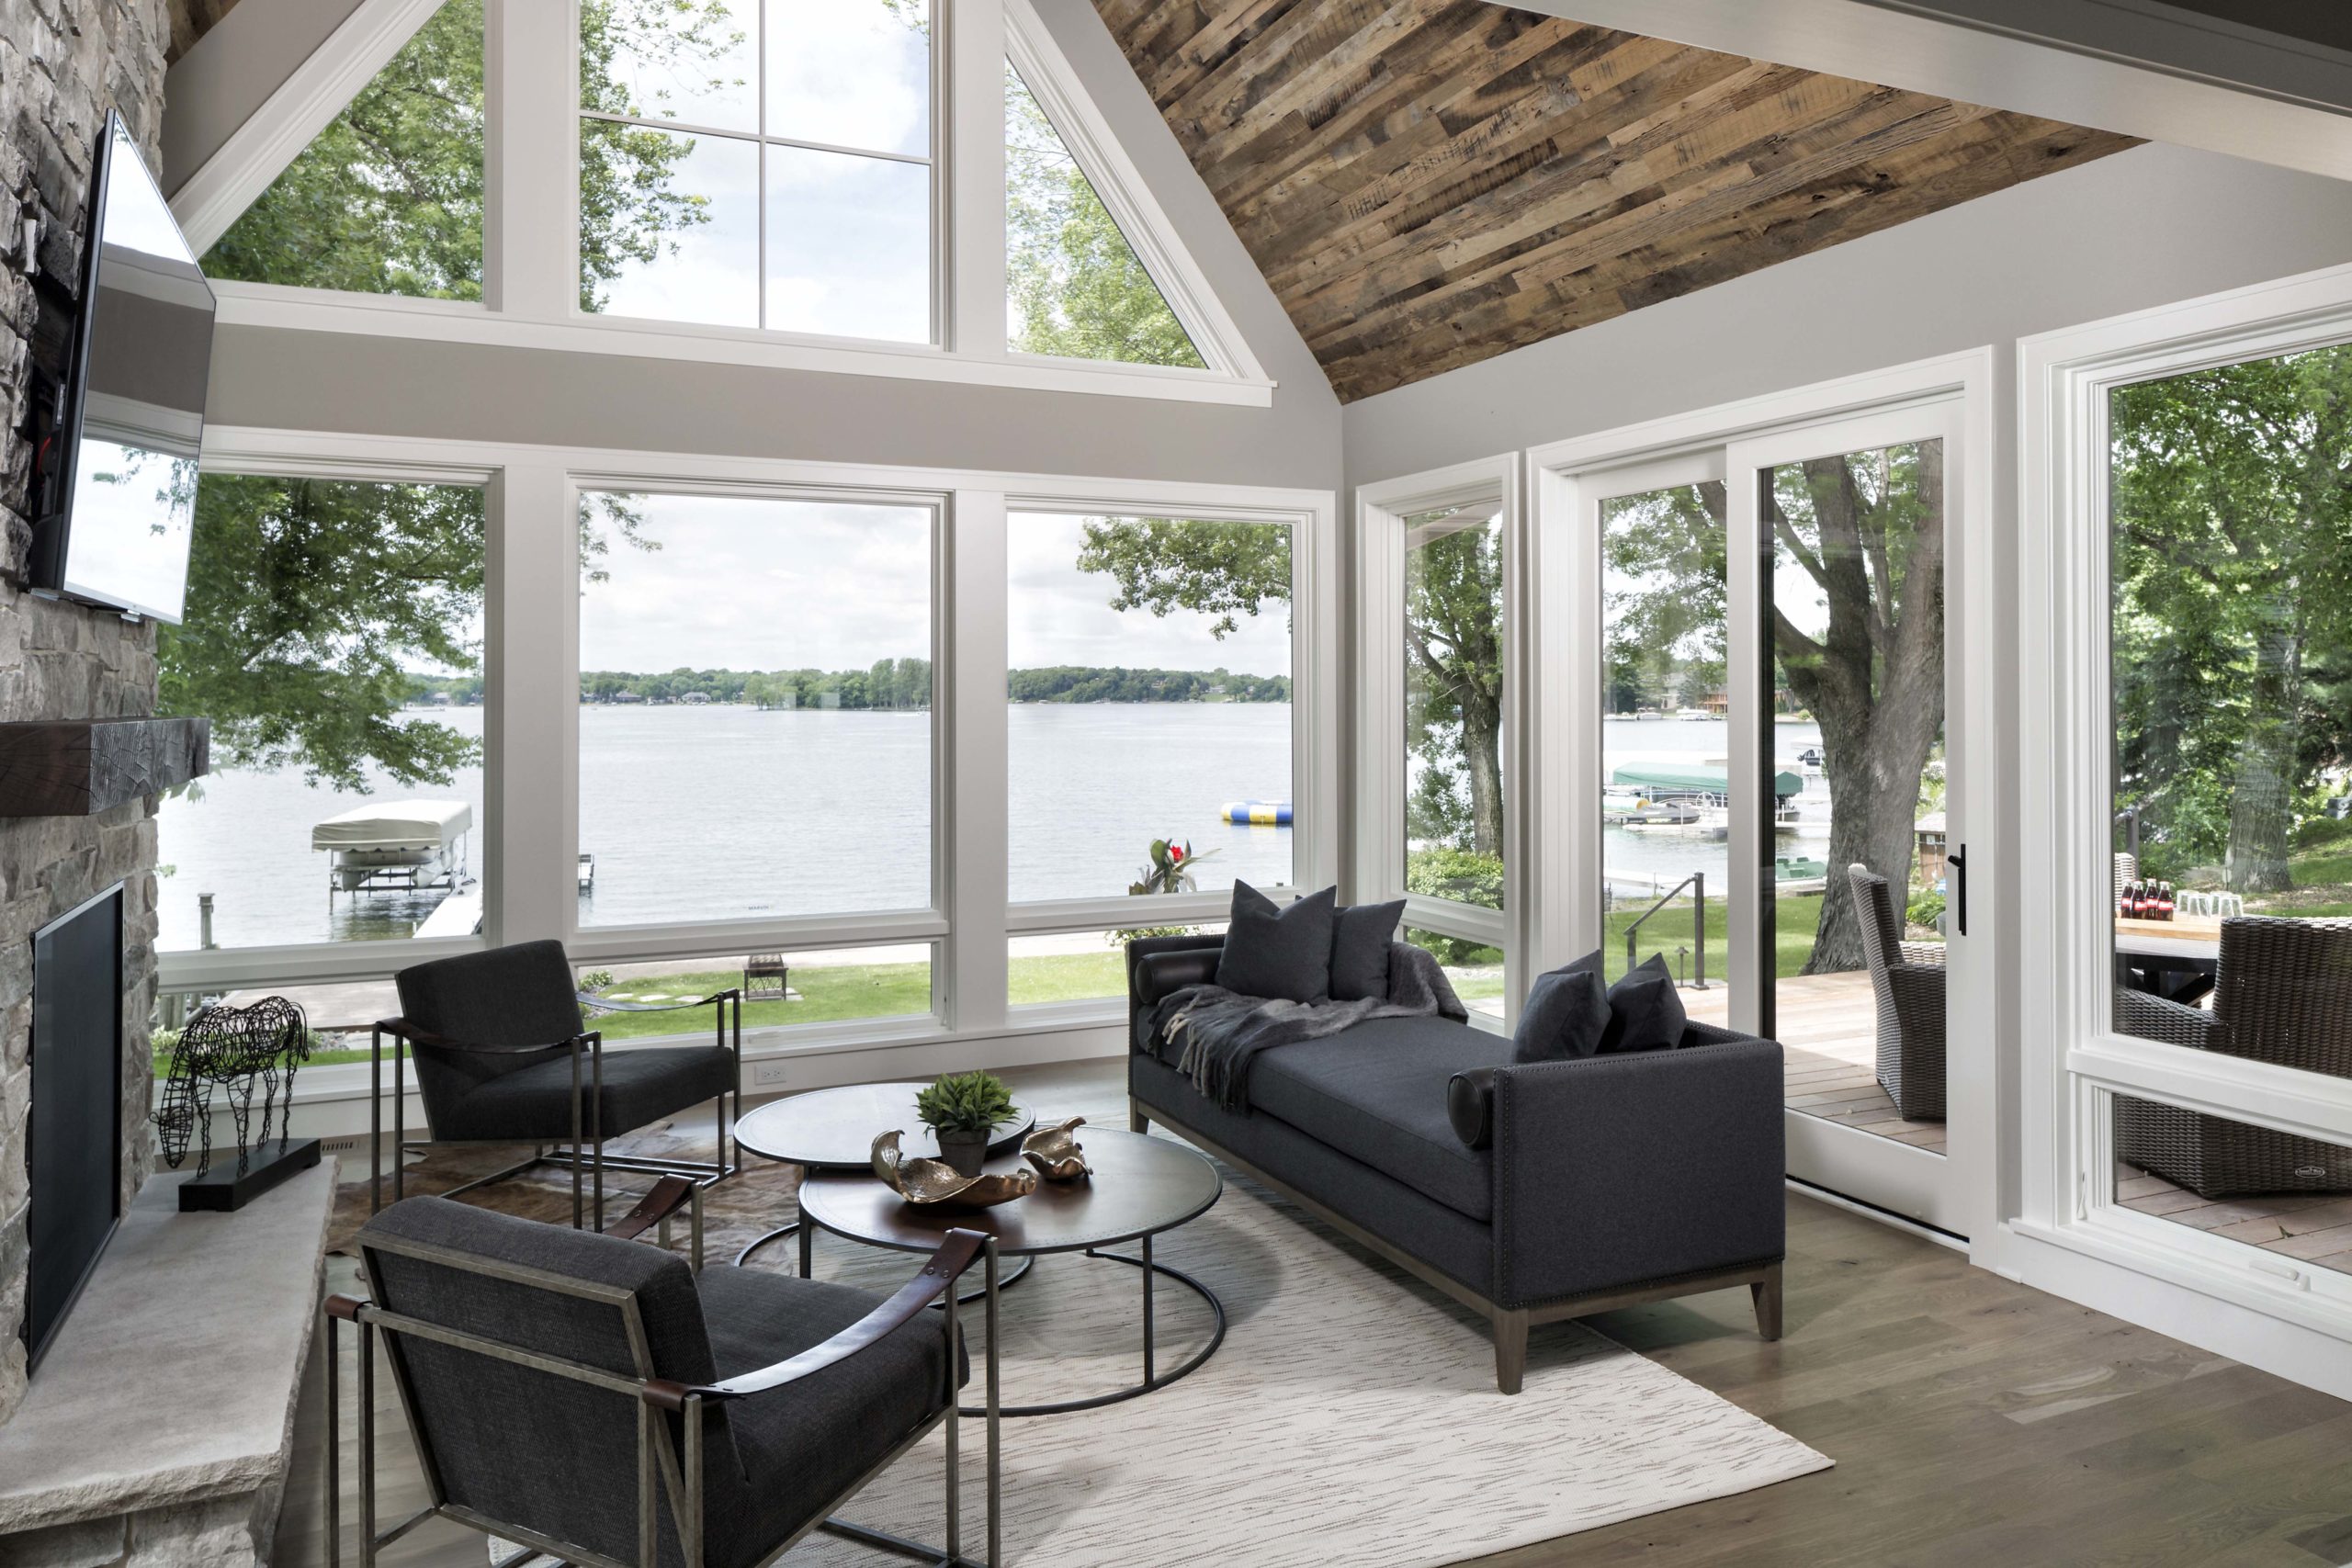 four season porch with floor to ceiling windows on all sides and black furniture